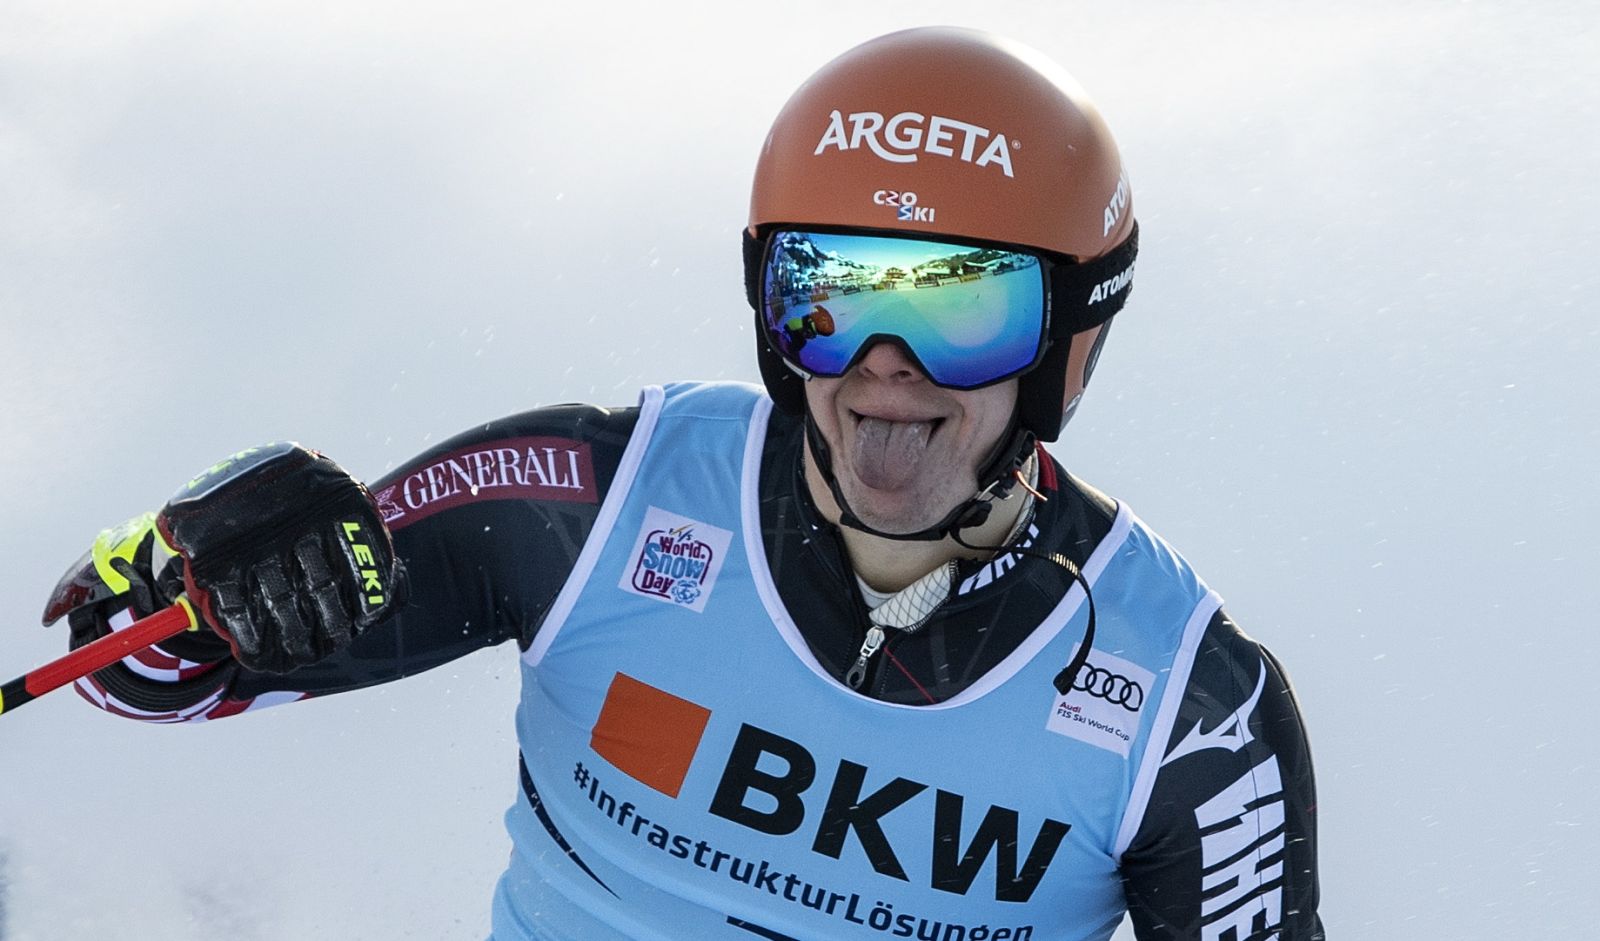 epa08926512 Filip Zubcic of Croatia reacts in the finish area during the second run of the men's giant slalom race at the FIS Alpine Skiing World Cup event in Adelboden, Switzerland, 08 January 2021.  EPA/PETER SCHNEIDER